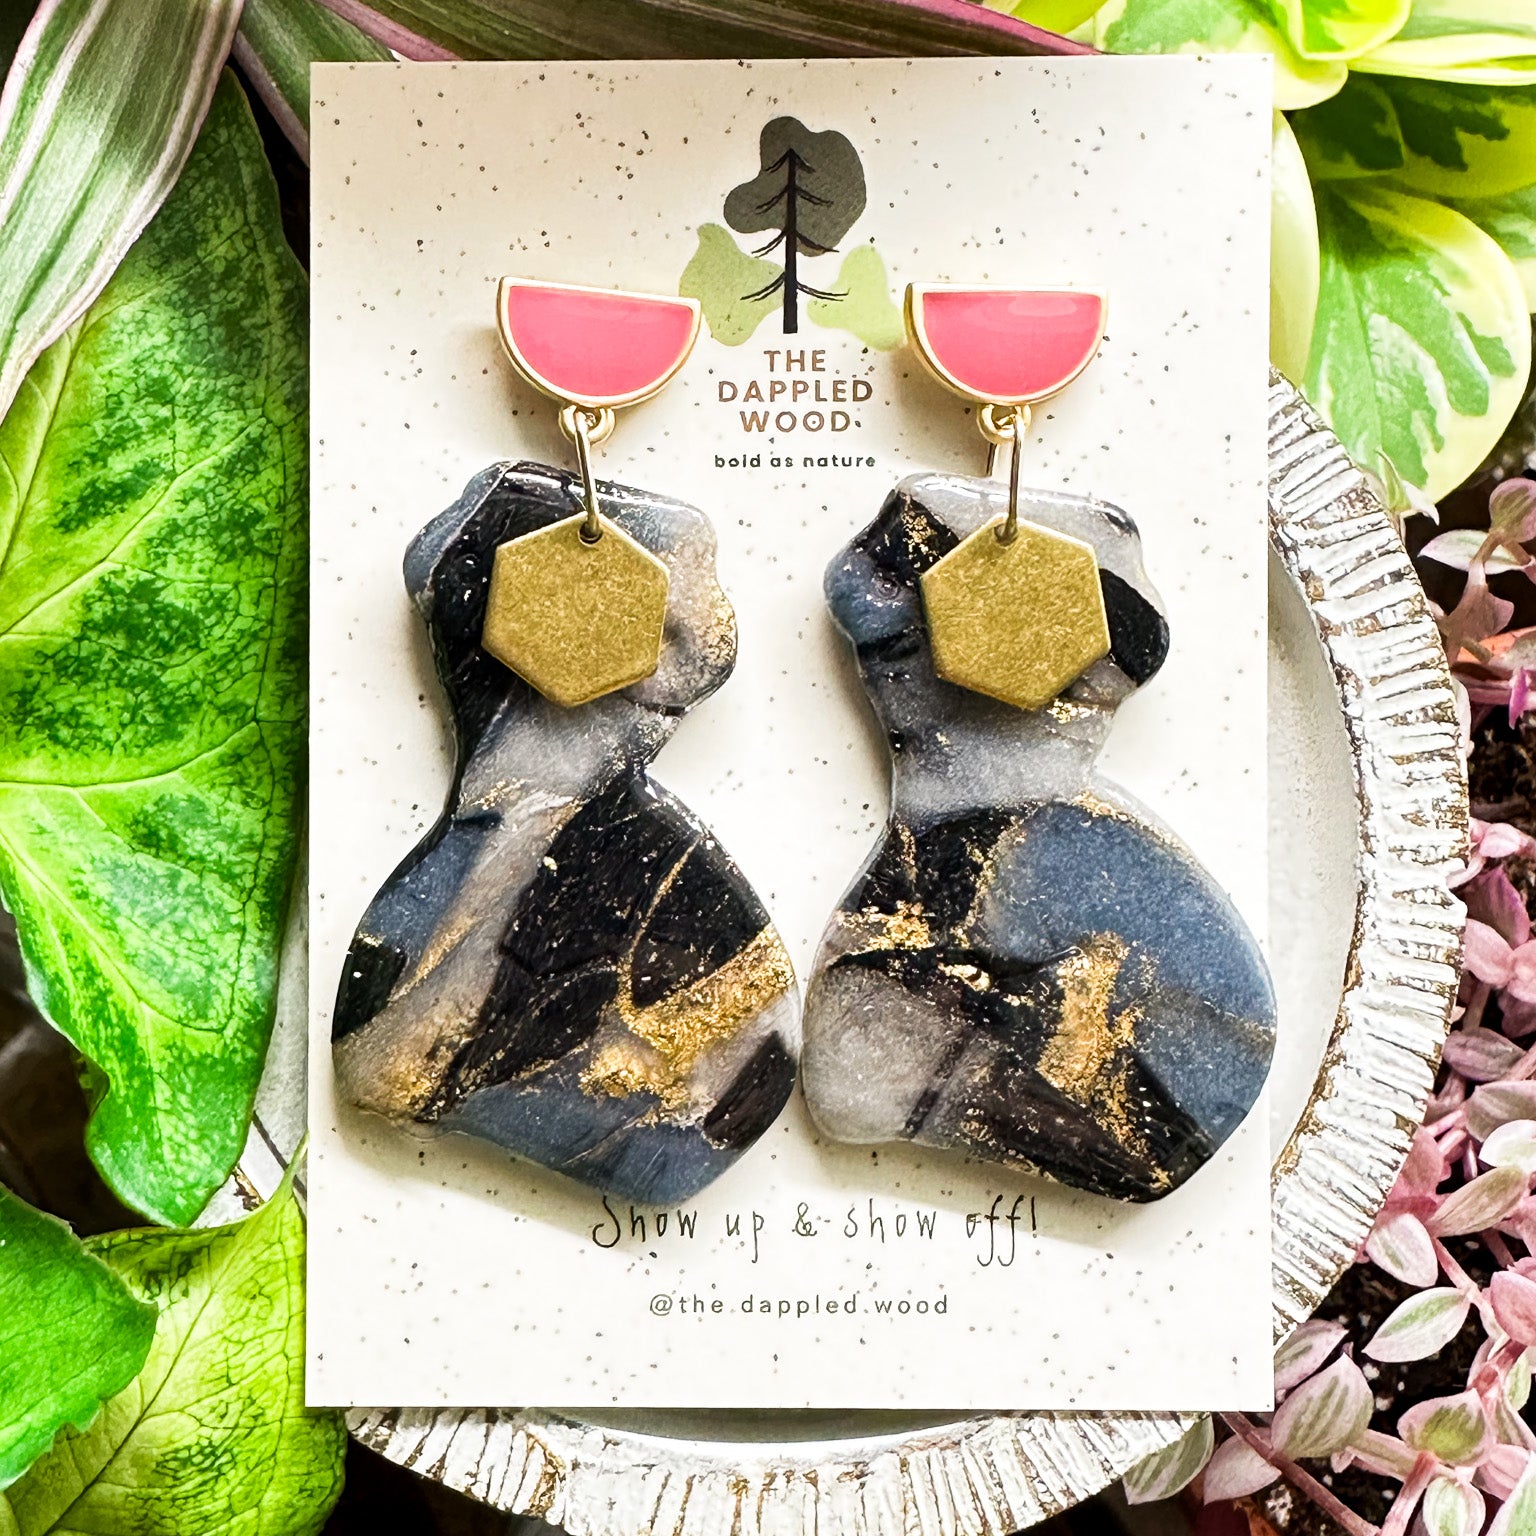 A pair of polymer clay earrings displayed on a speckled card. The earrings feature a marbled black and gray pattern with shimmering gold accents and are in the shape of a curvy woman that is adorned with a brass hexagon charm. The earrings hang from pink and gold half moon posts. They are surrounded by vibrant green and pink plants. The card reads 'The Dappled Wood: bold as nature' and 'Show up & show off!' with the handle '@the.dappled.wood'